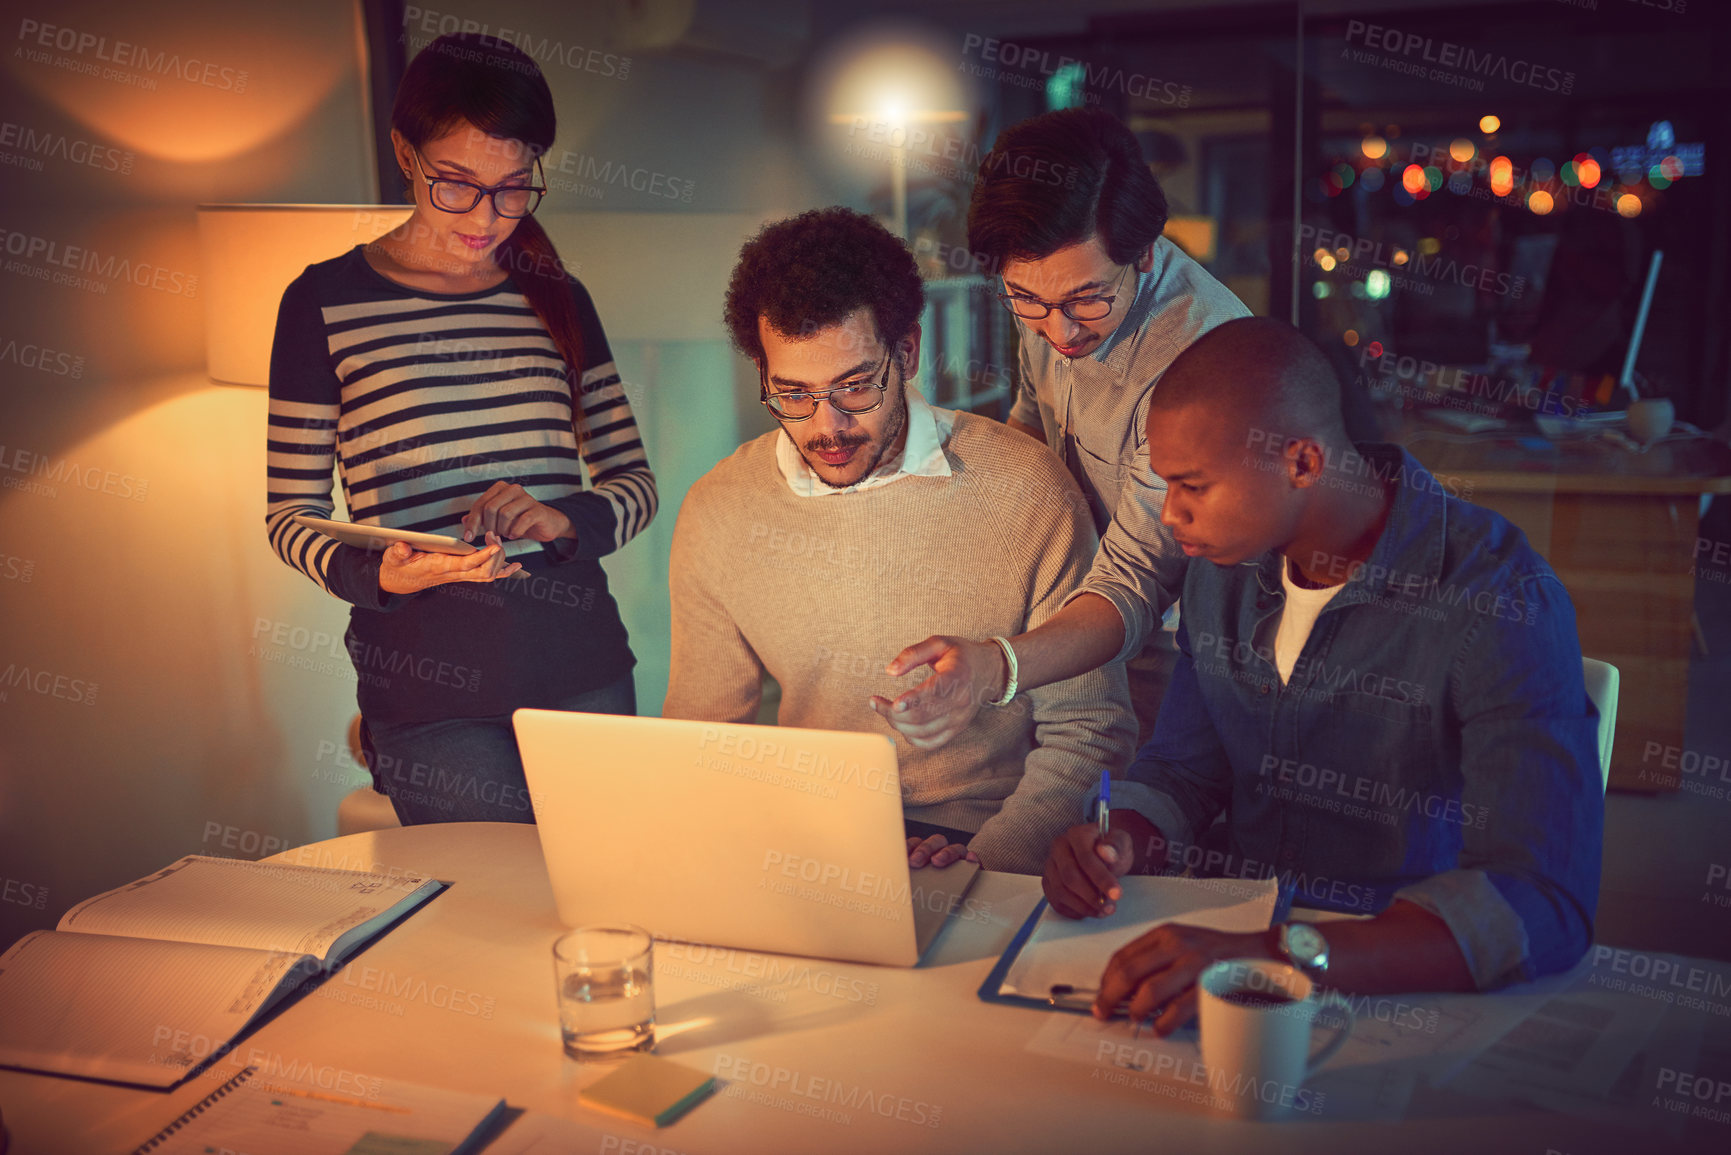 Buy stock photo Shot of a group of designers working late in an office